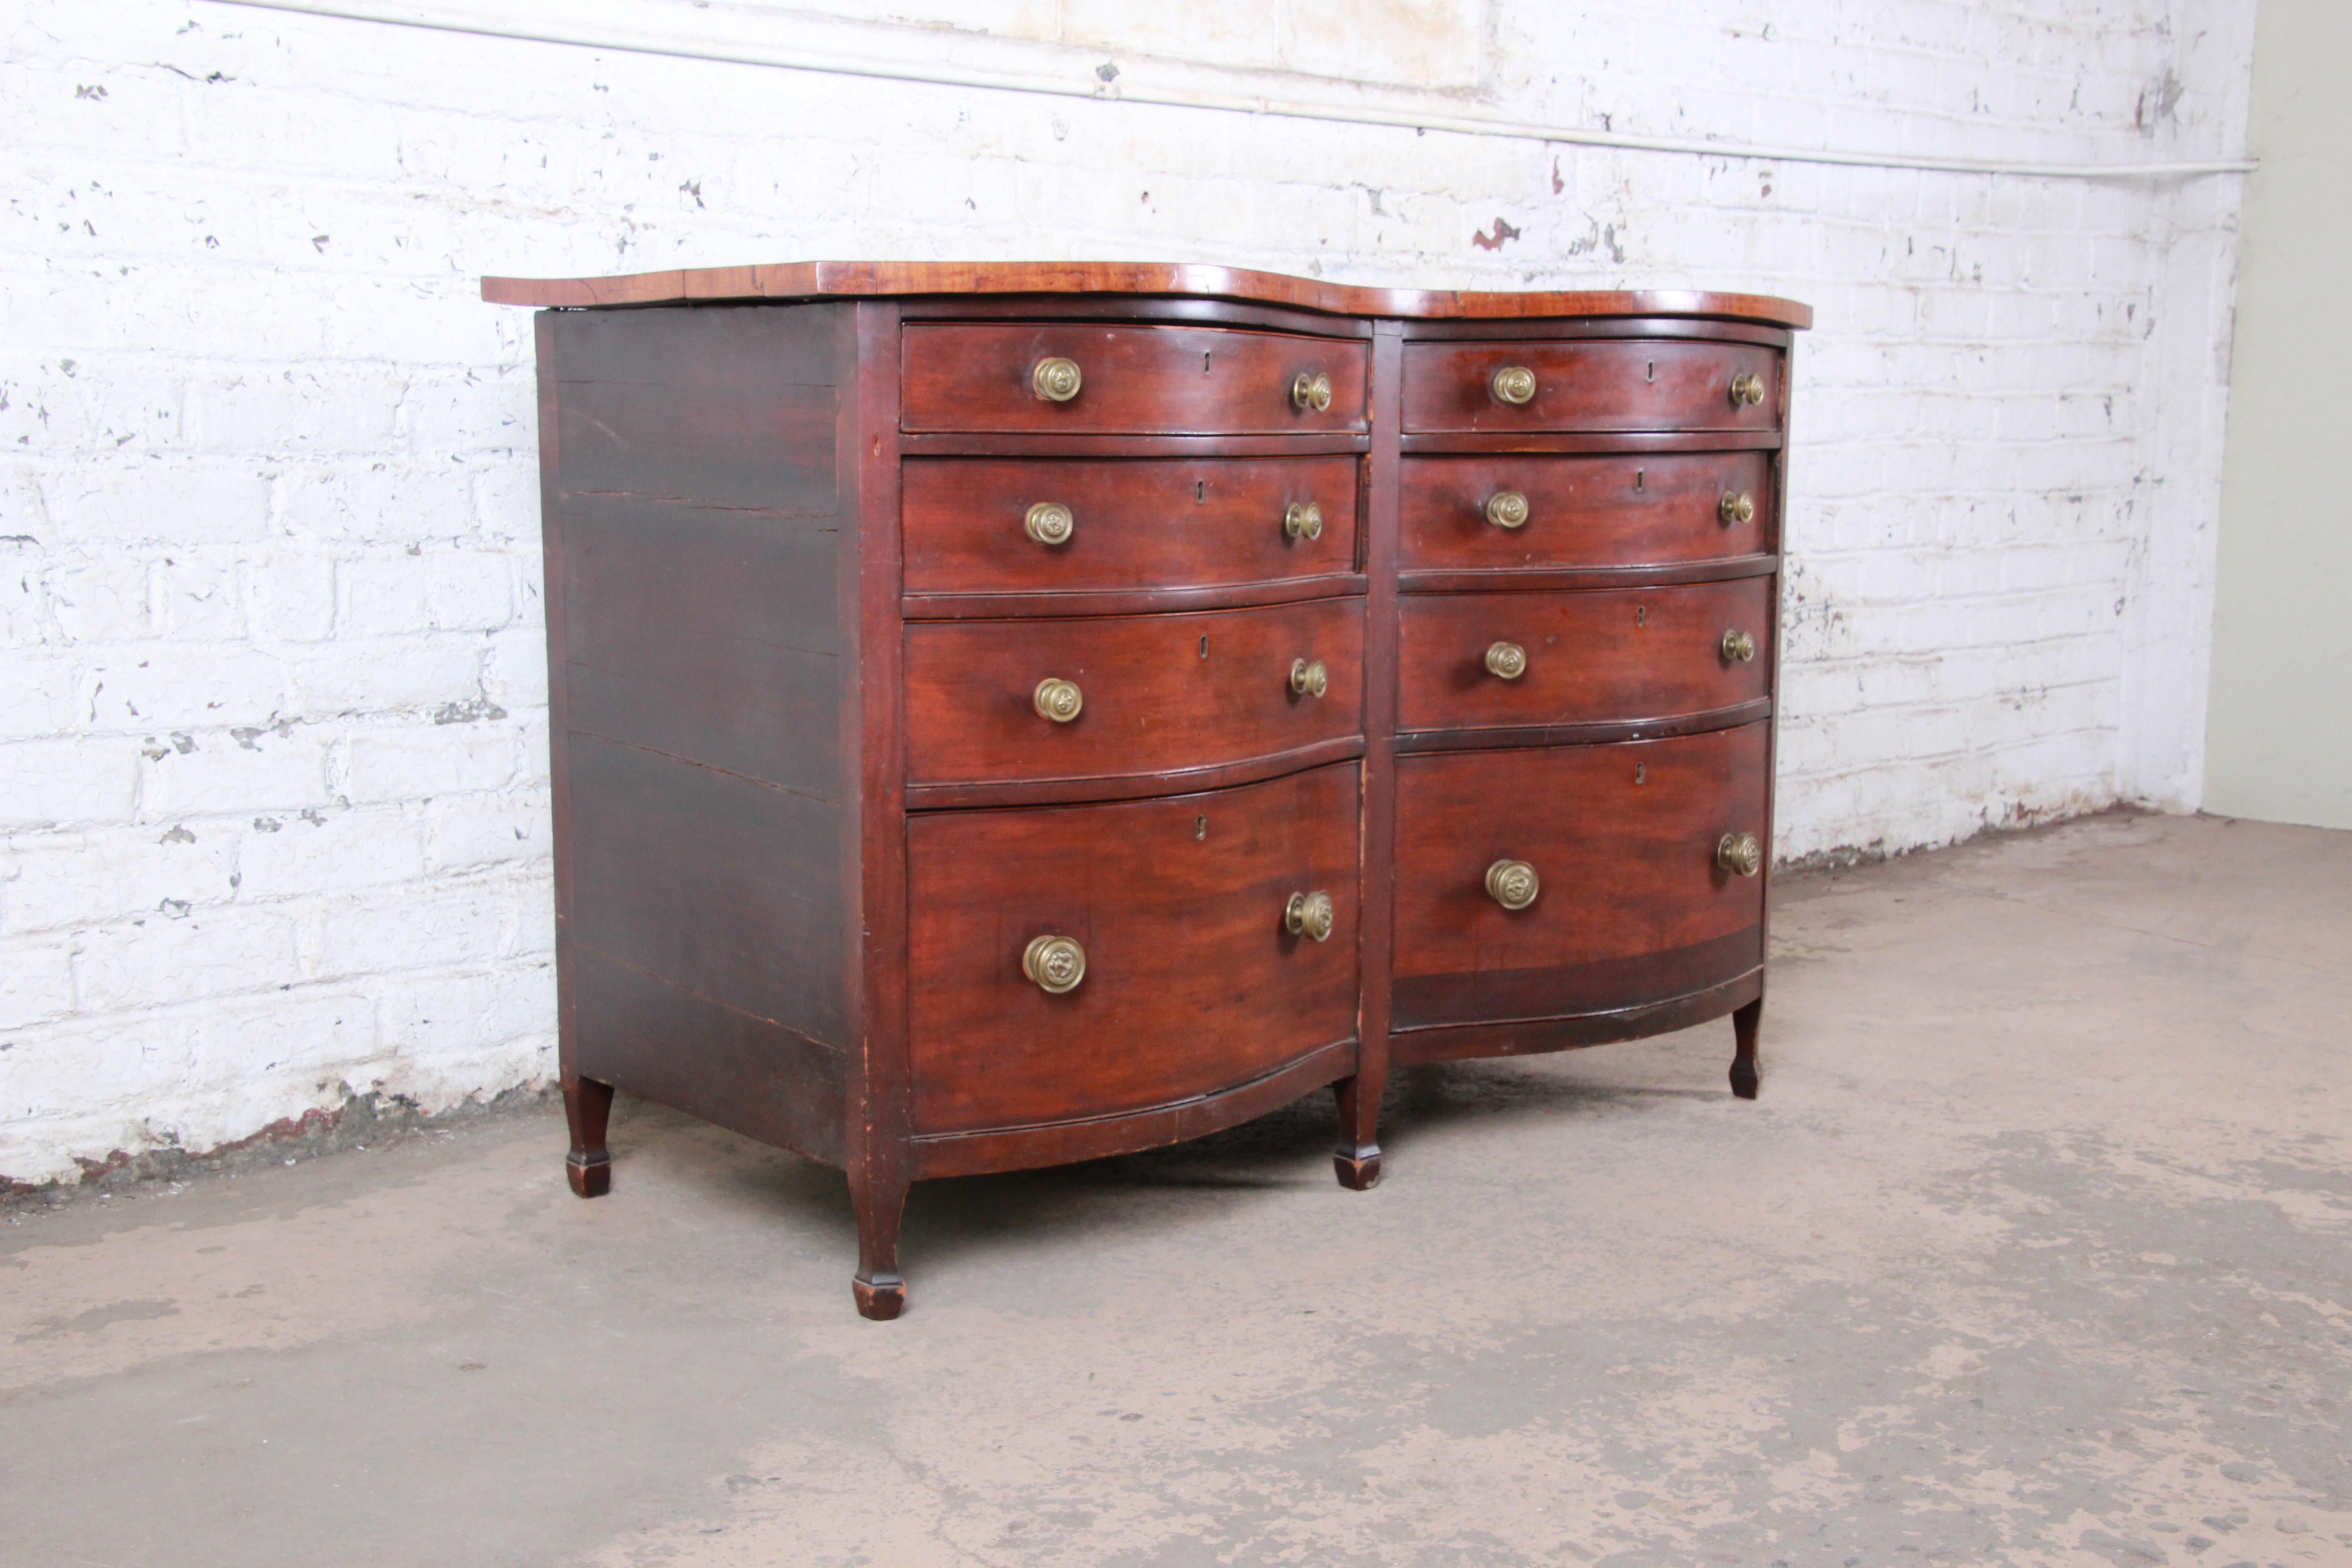 A gorgeous antique mahogany double bow front eight-drawer dresser

USA, 19th century

Mahogany and brass lion face hardware

Measures: 56.25